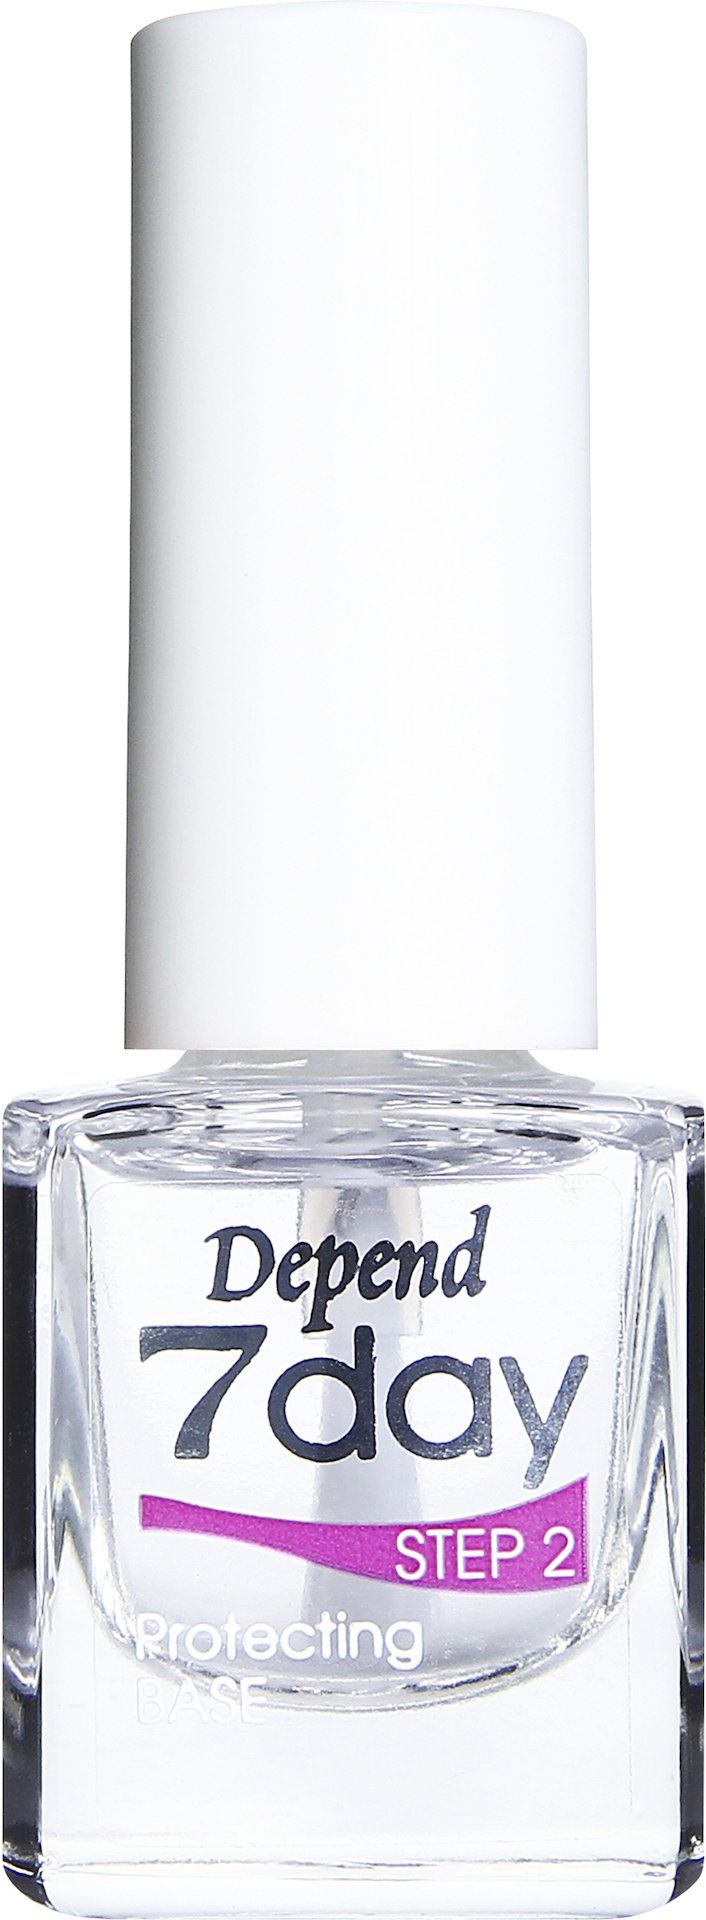 Depend Depend 7day Protecting Base 5 ml